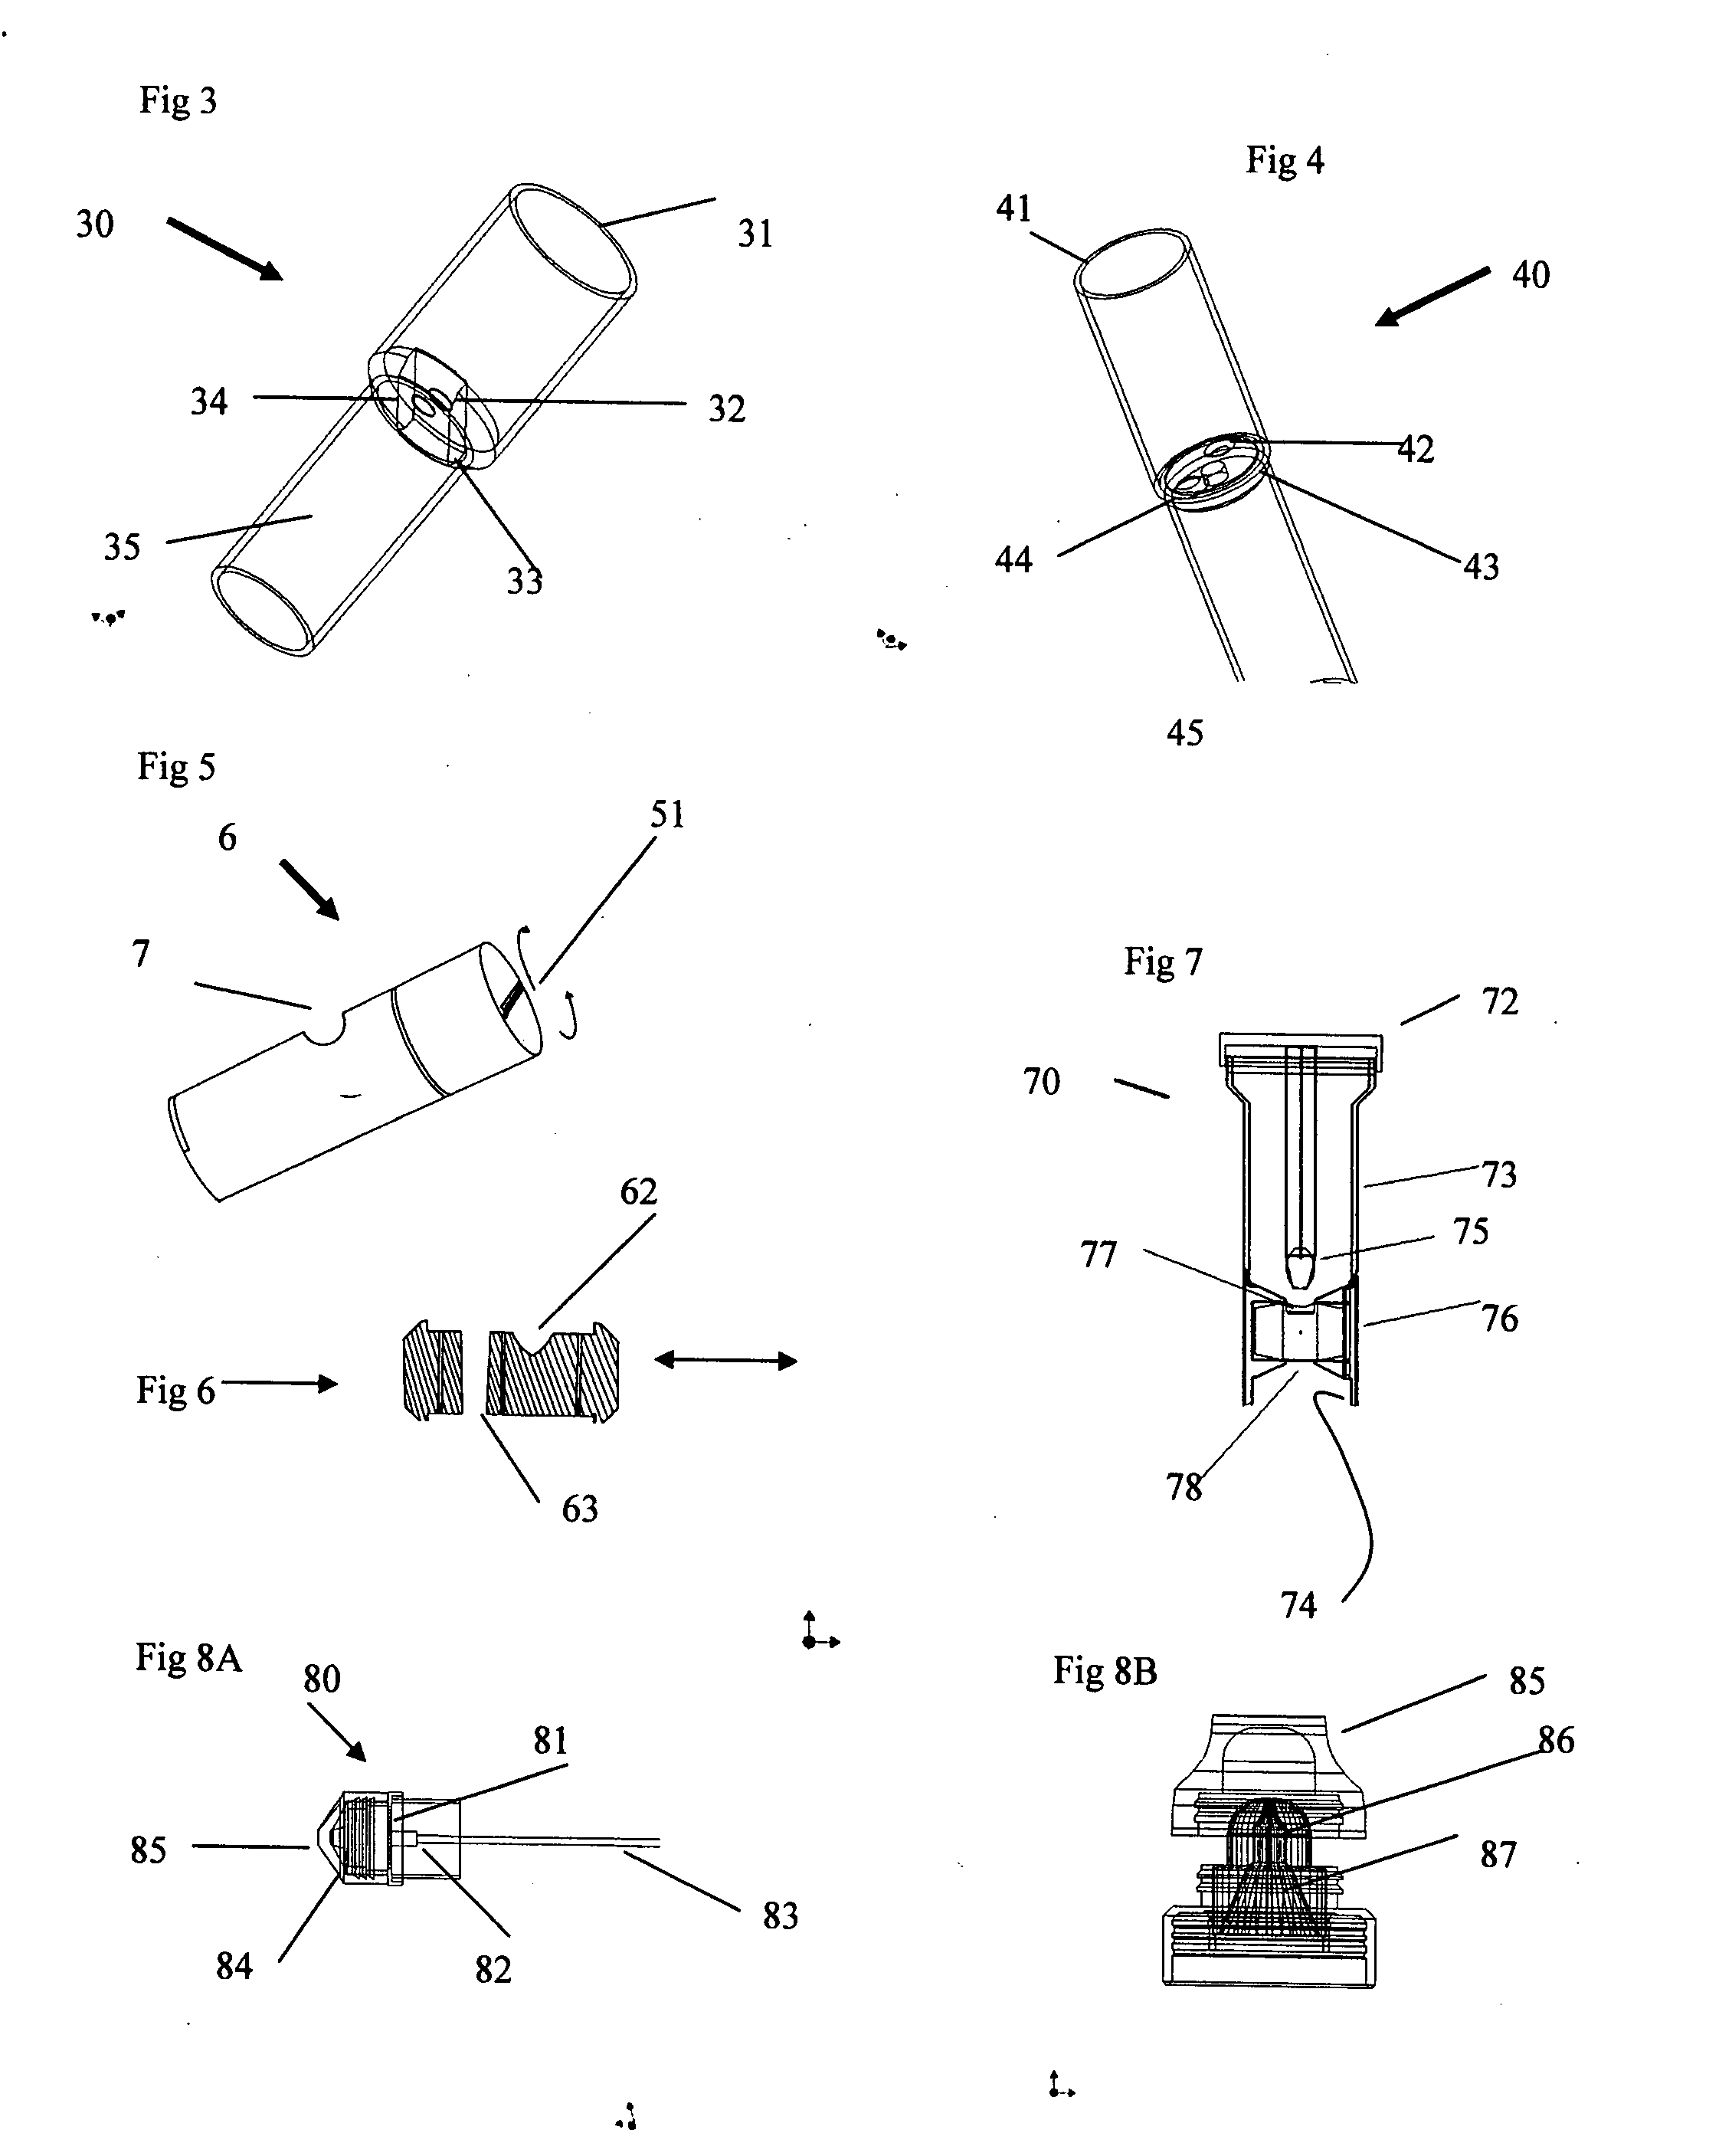 Specimen collection and testing apparatus